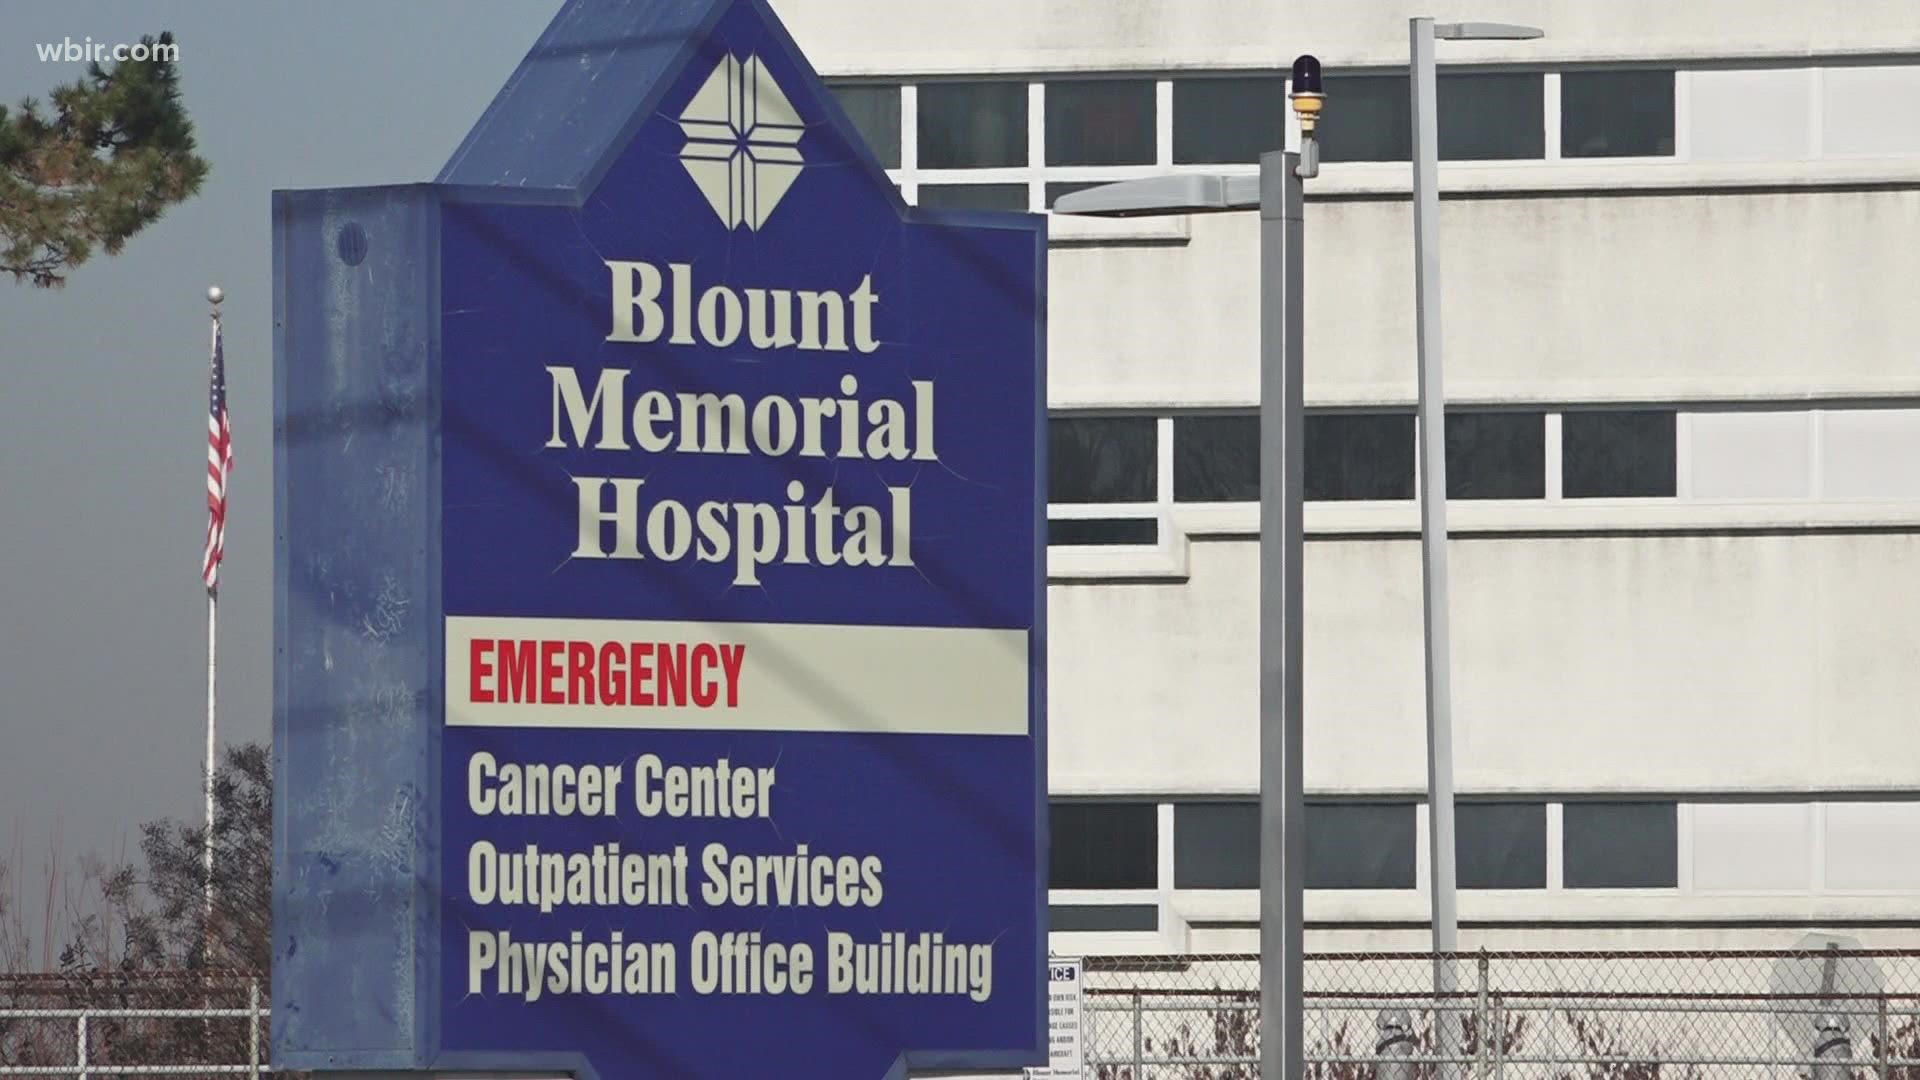 Blount Memorial said it will stop admitting patients to its 16 behavioral healthcare beds to focus on outpatient care.